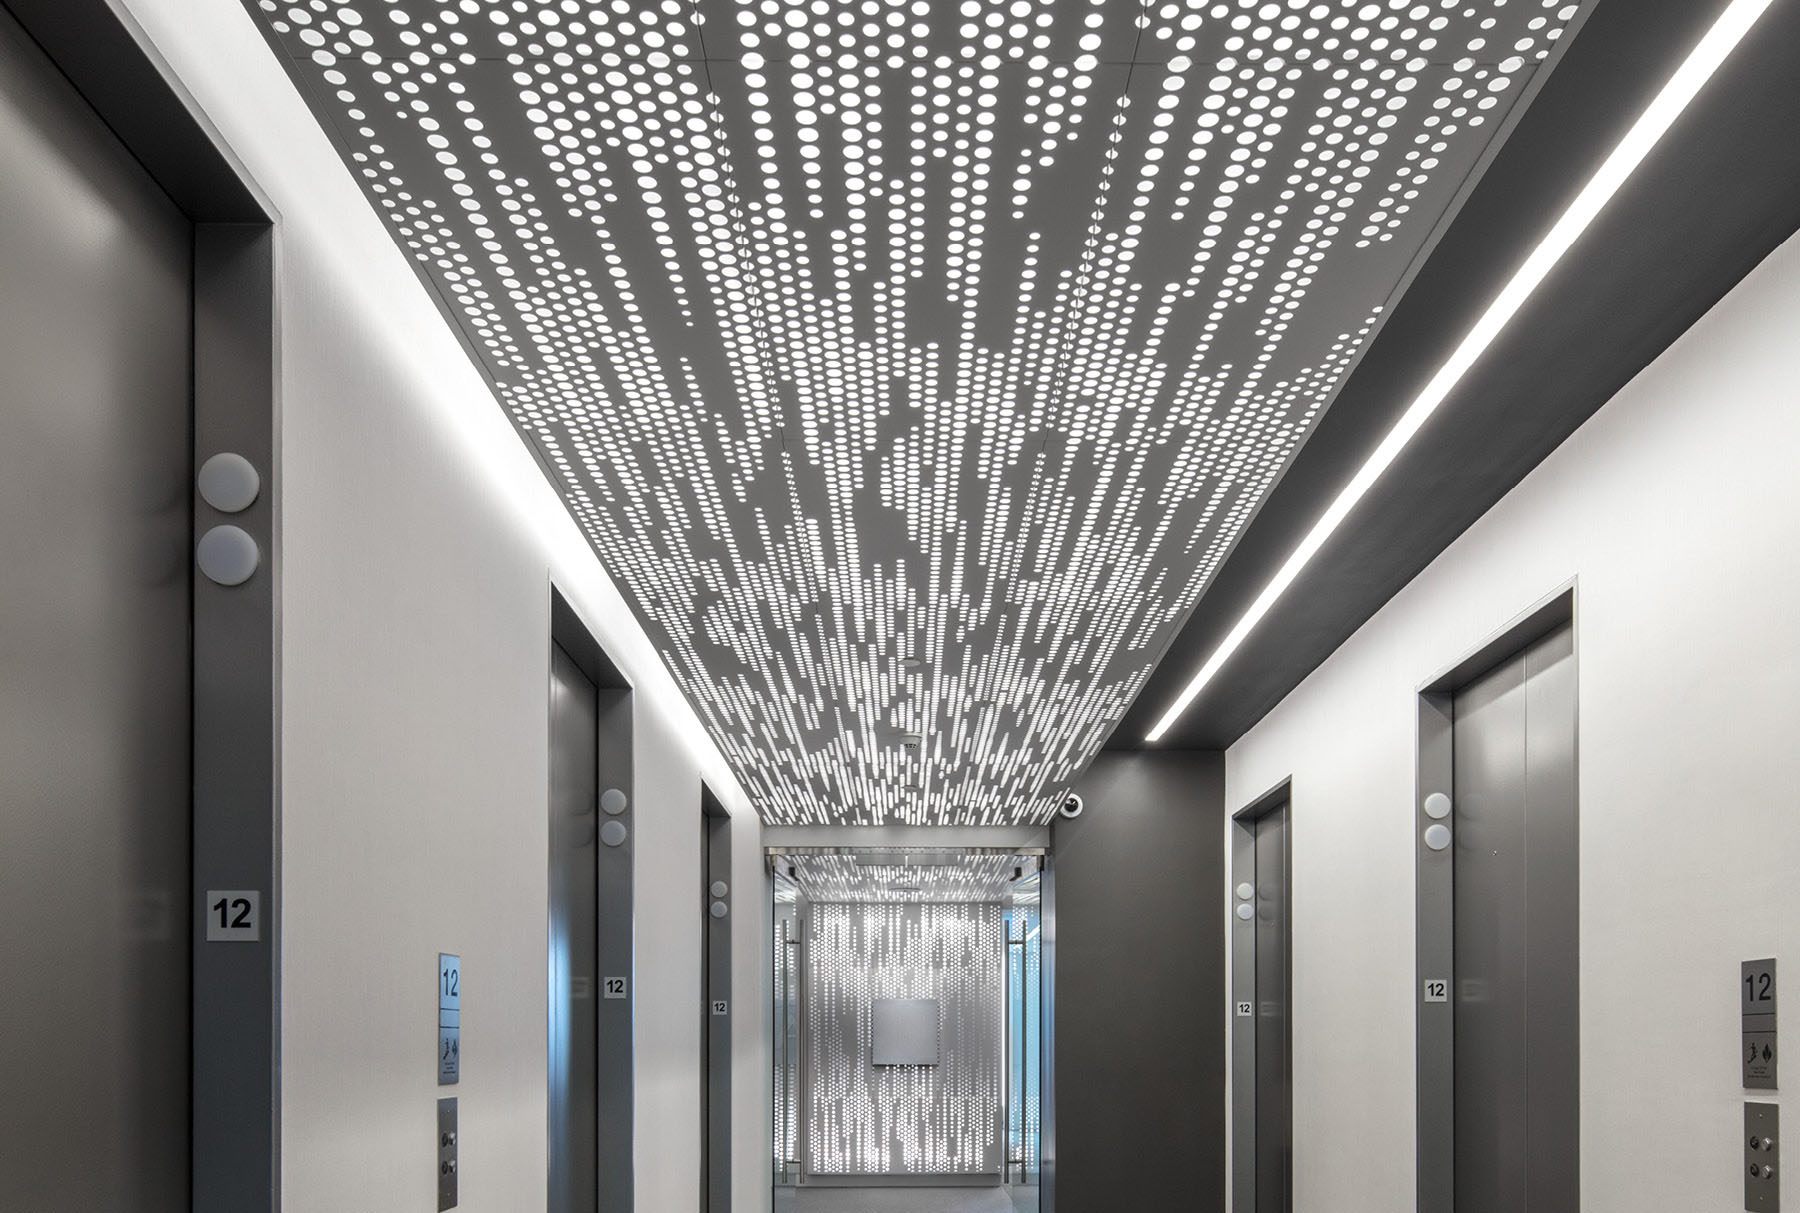 Ceiling Peer | Cotton | Black-and-white